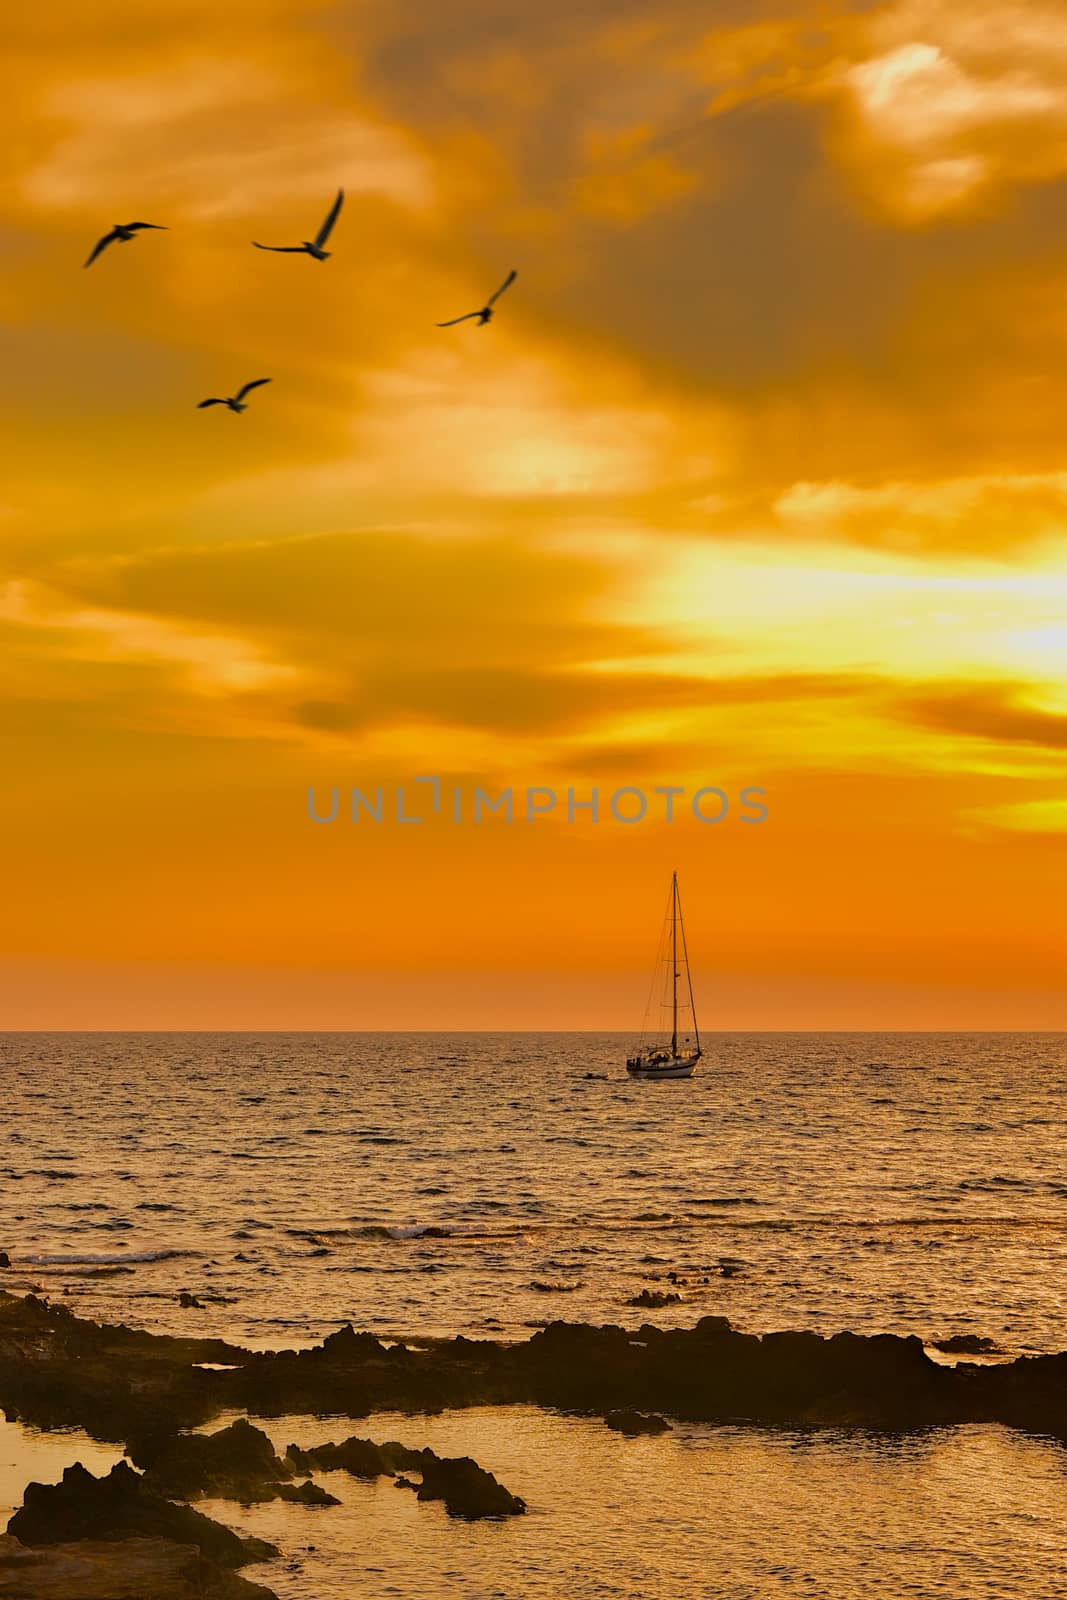 Sailboat leaving at dusk with some seagulls in foreground by rosariomanzo